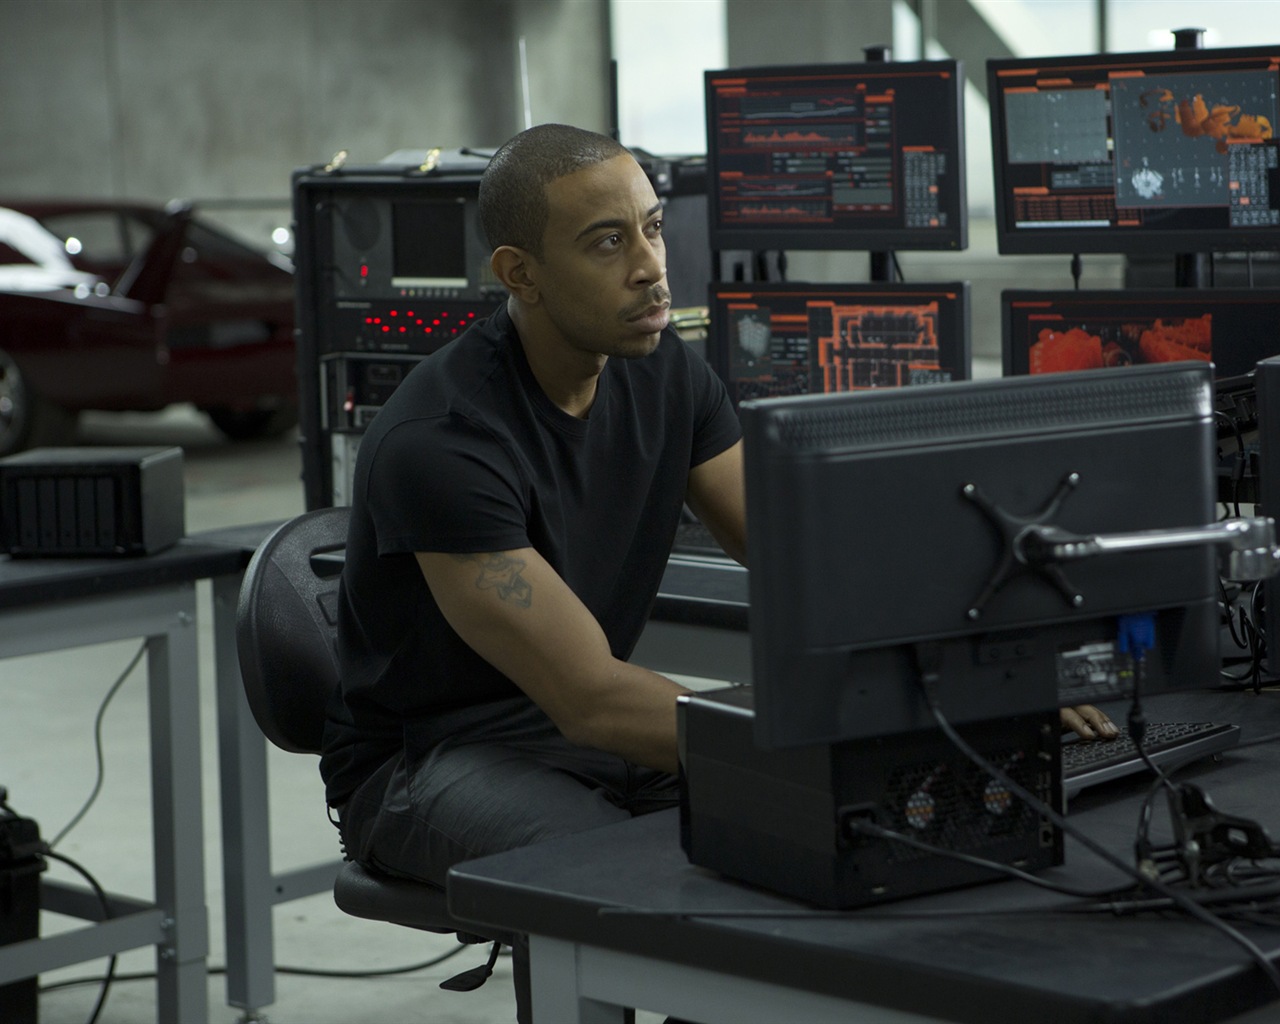 Fast And Furious 6 HD movie wallpapers #16 - 1280x1024